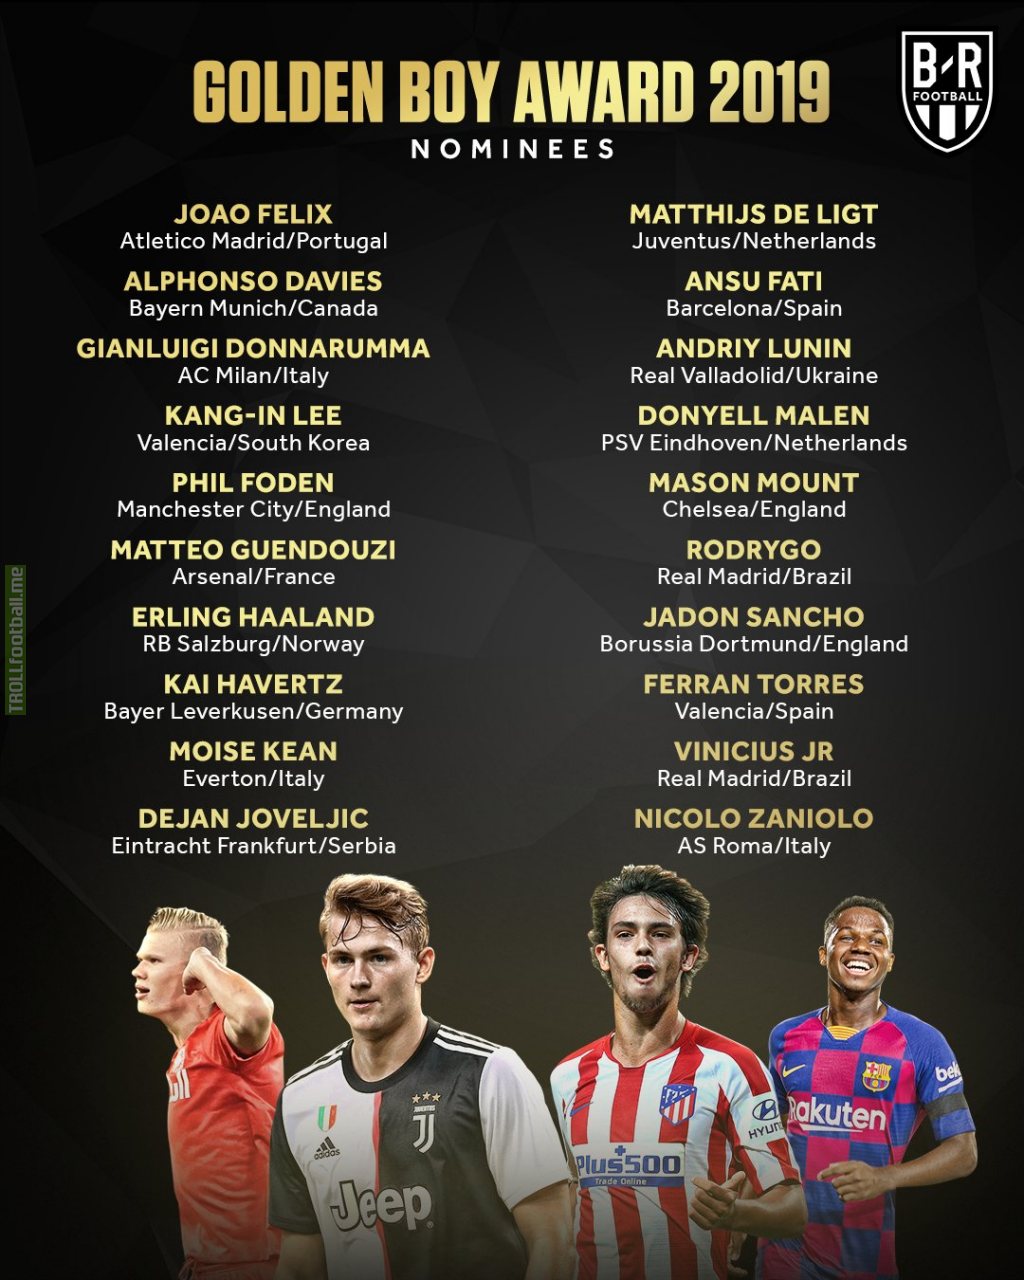 The 20-man shortlist for the 2019 Golden Boy has been announced